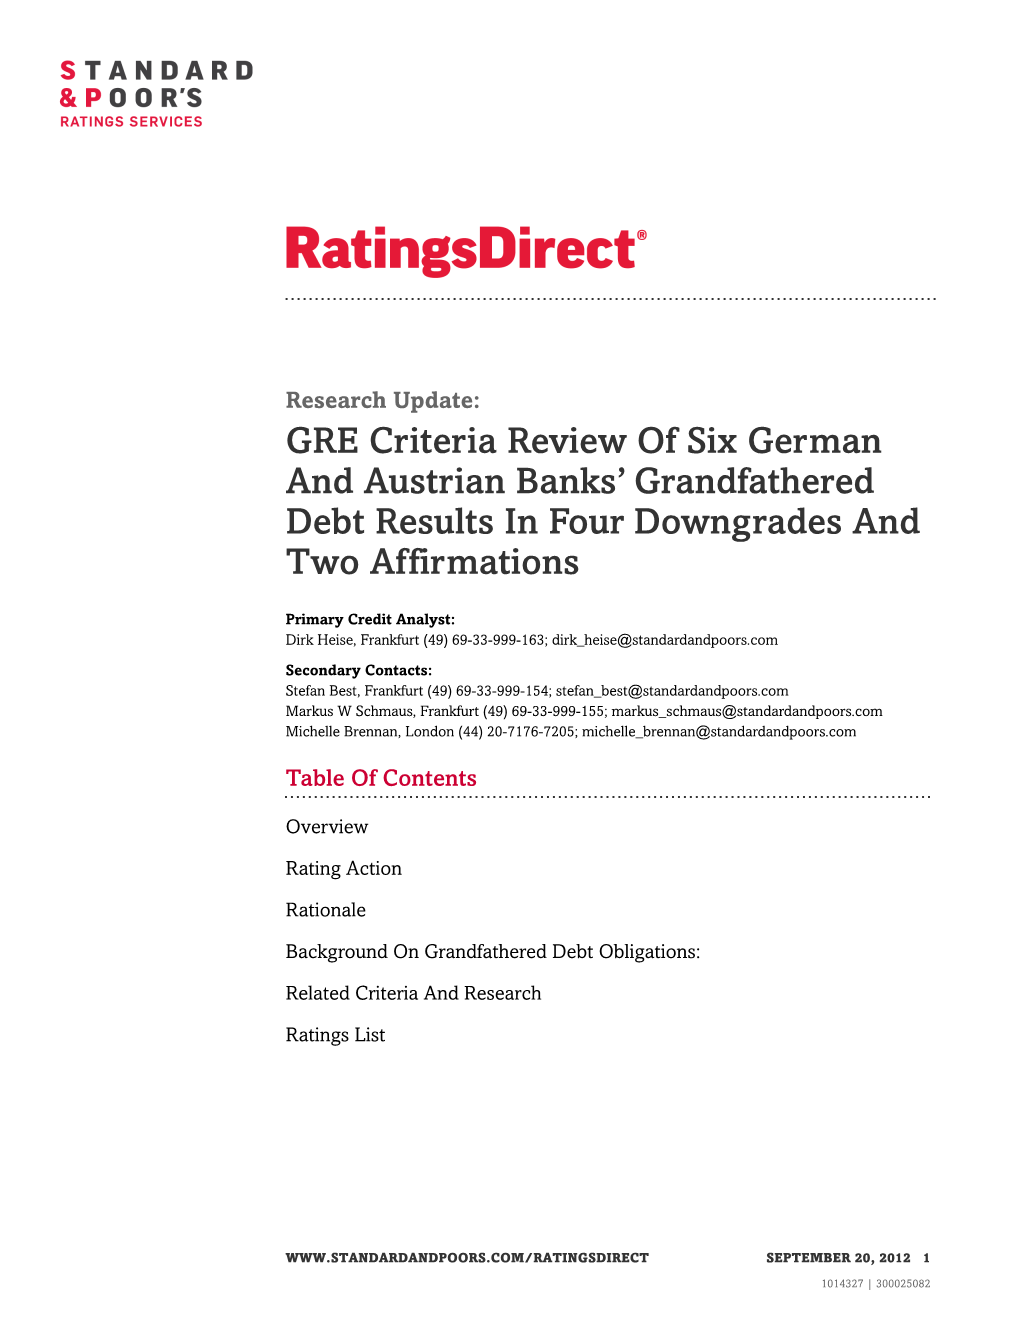 GRE Criteria Review of Six German and Austrian Banks' Grandfathered Debt Results in Four Downgrades and Two Affirmations